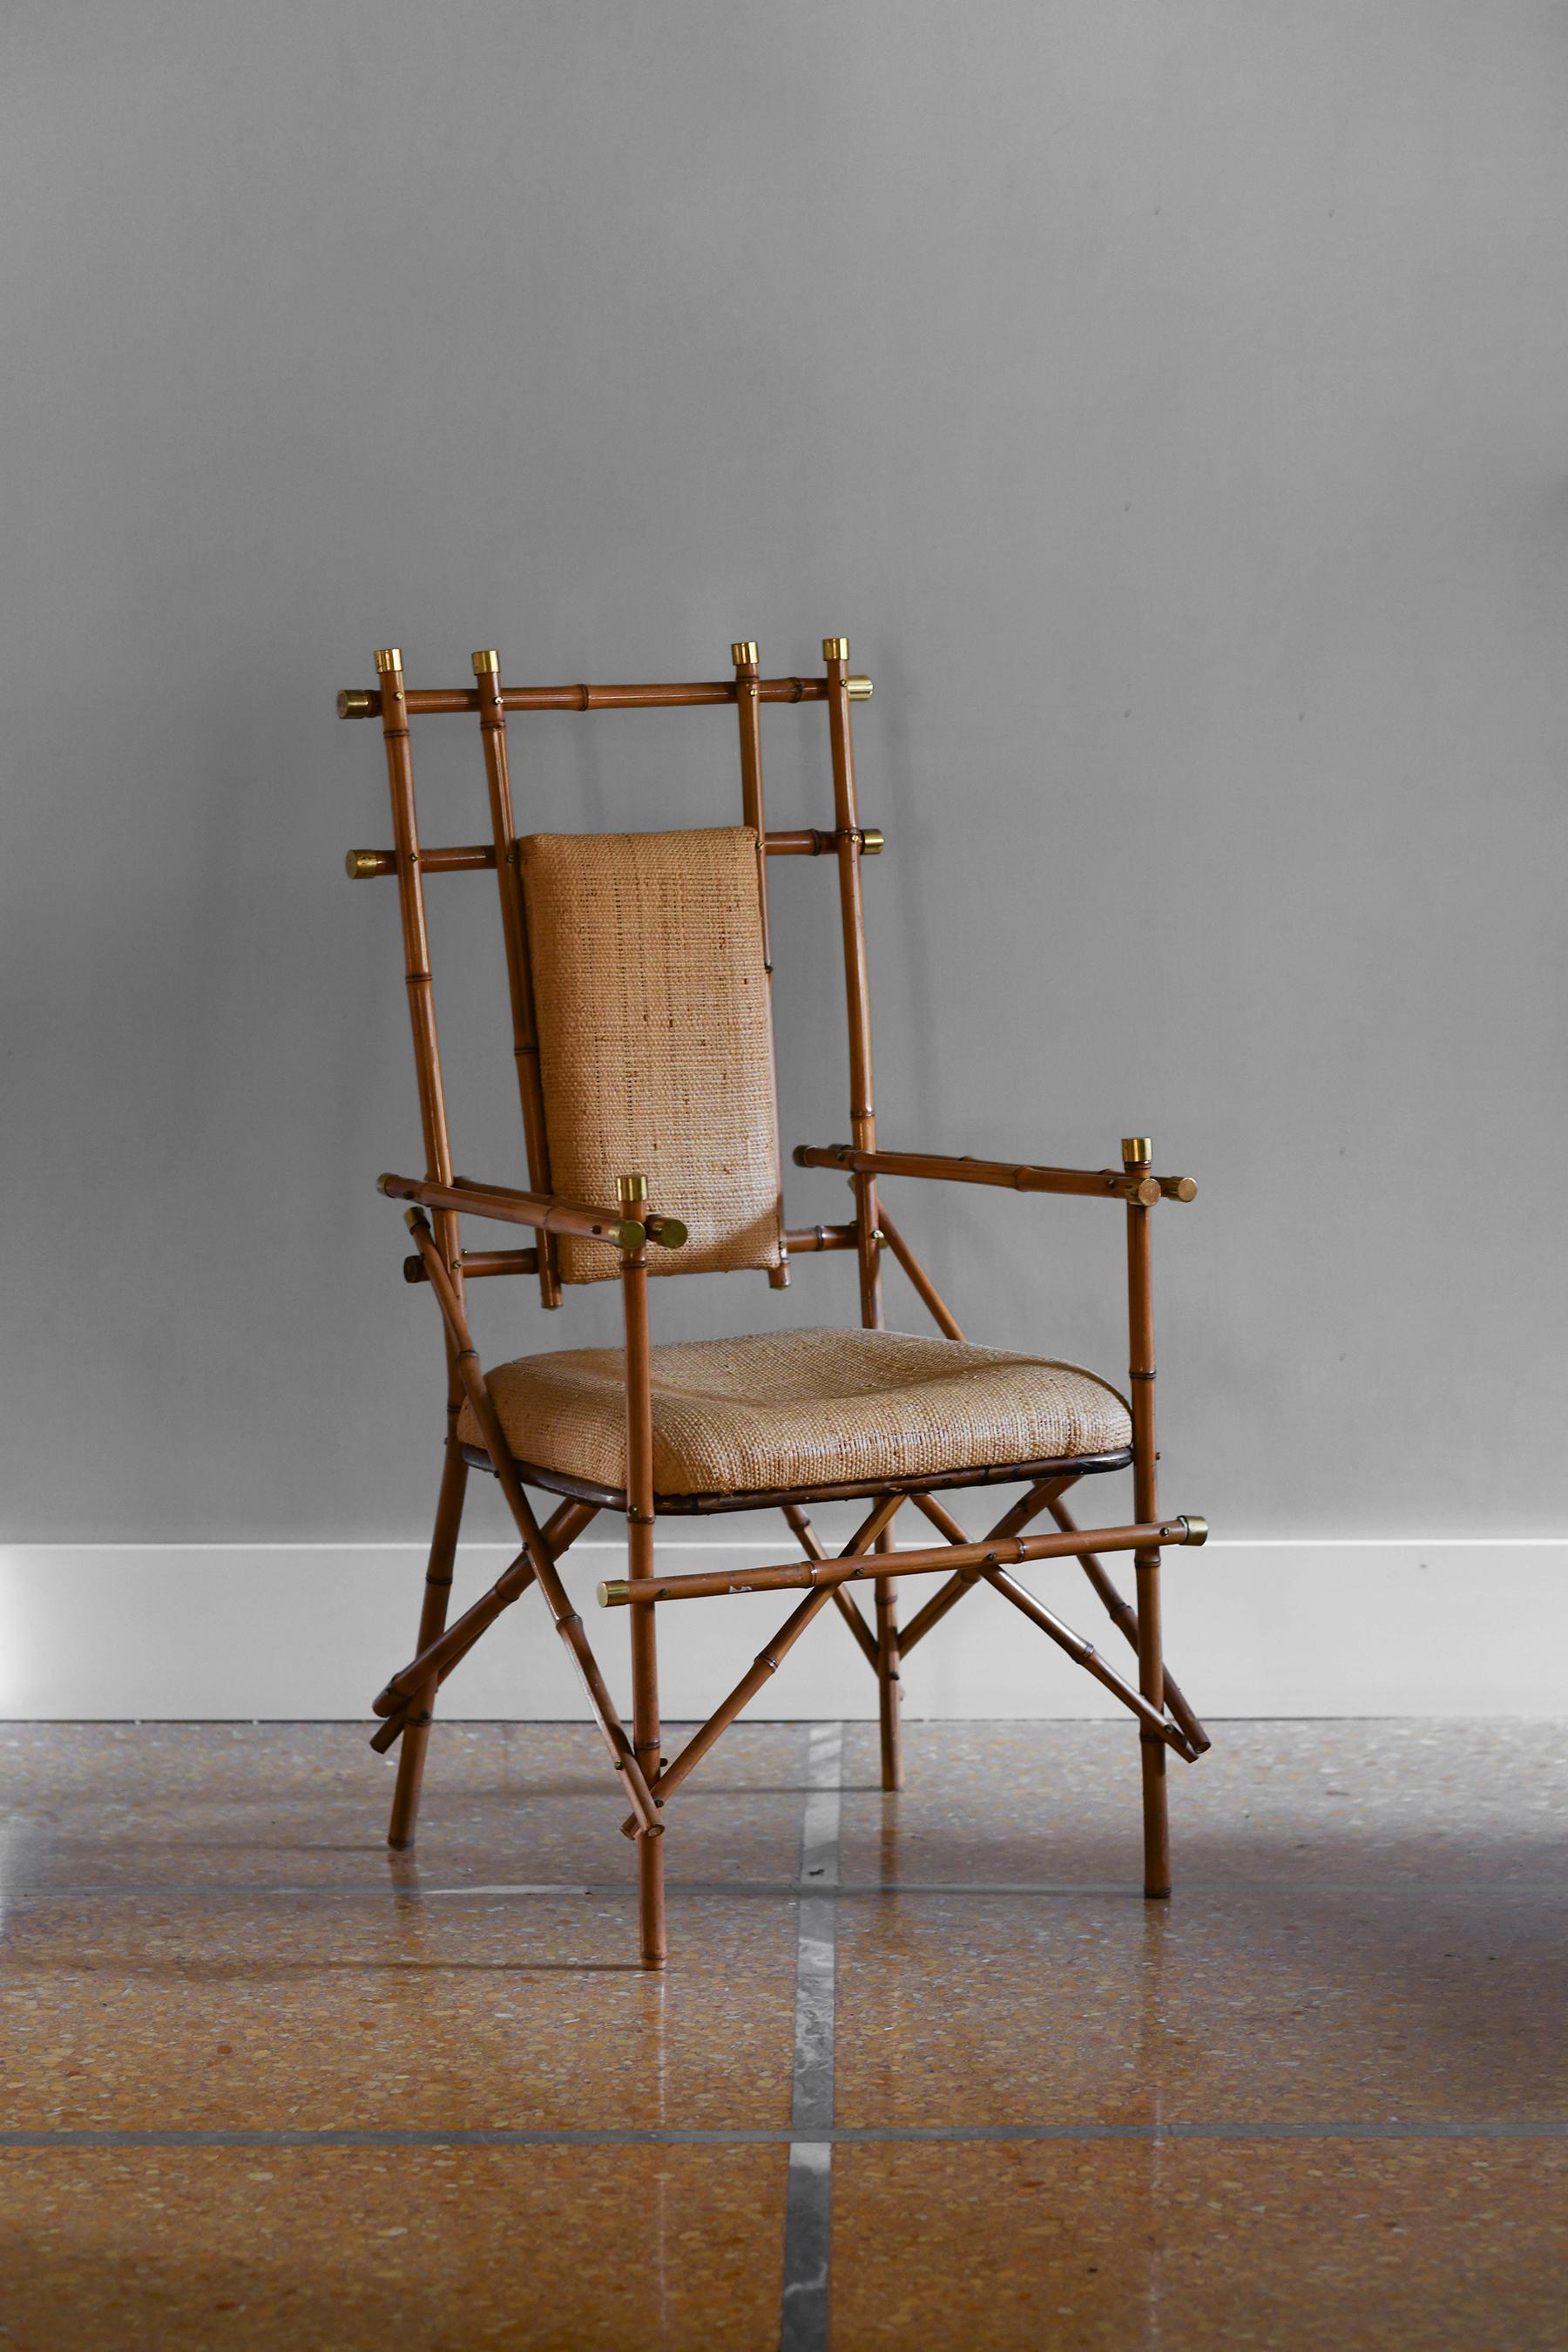 Rattan armchair with brass details and rattan fabric cushions by Giusto Puri Purini, Italy 1970.

From 1972 to 1977 Giusto Puri Purini worked within the company of the Italian design brand 